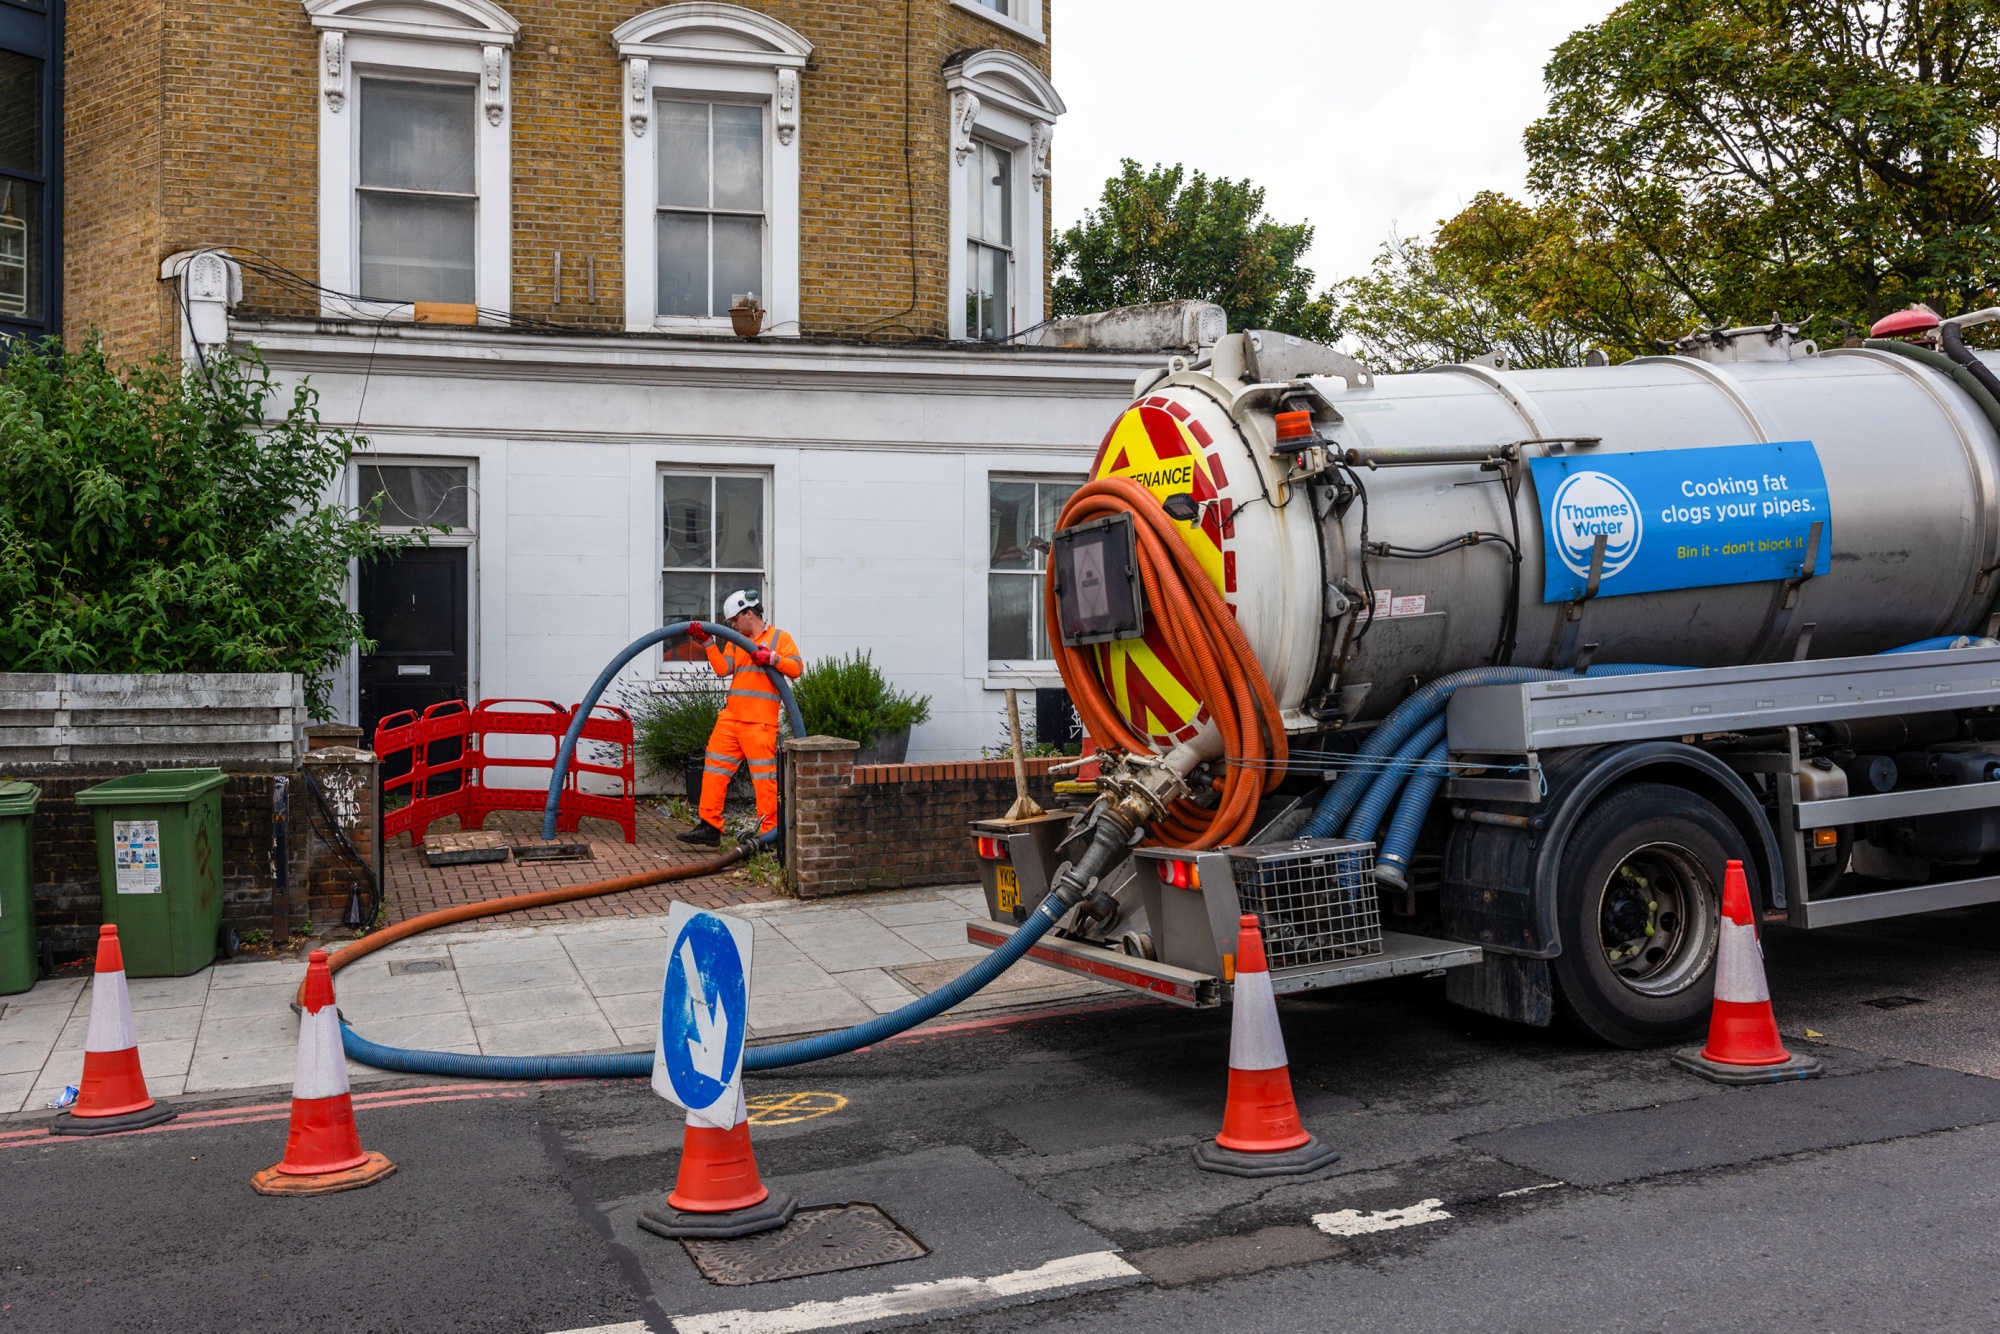 Thames Water and Other Firms in the Cost-of-Living Crisi